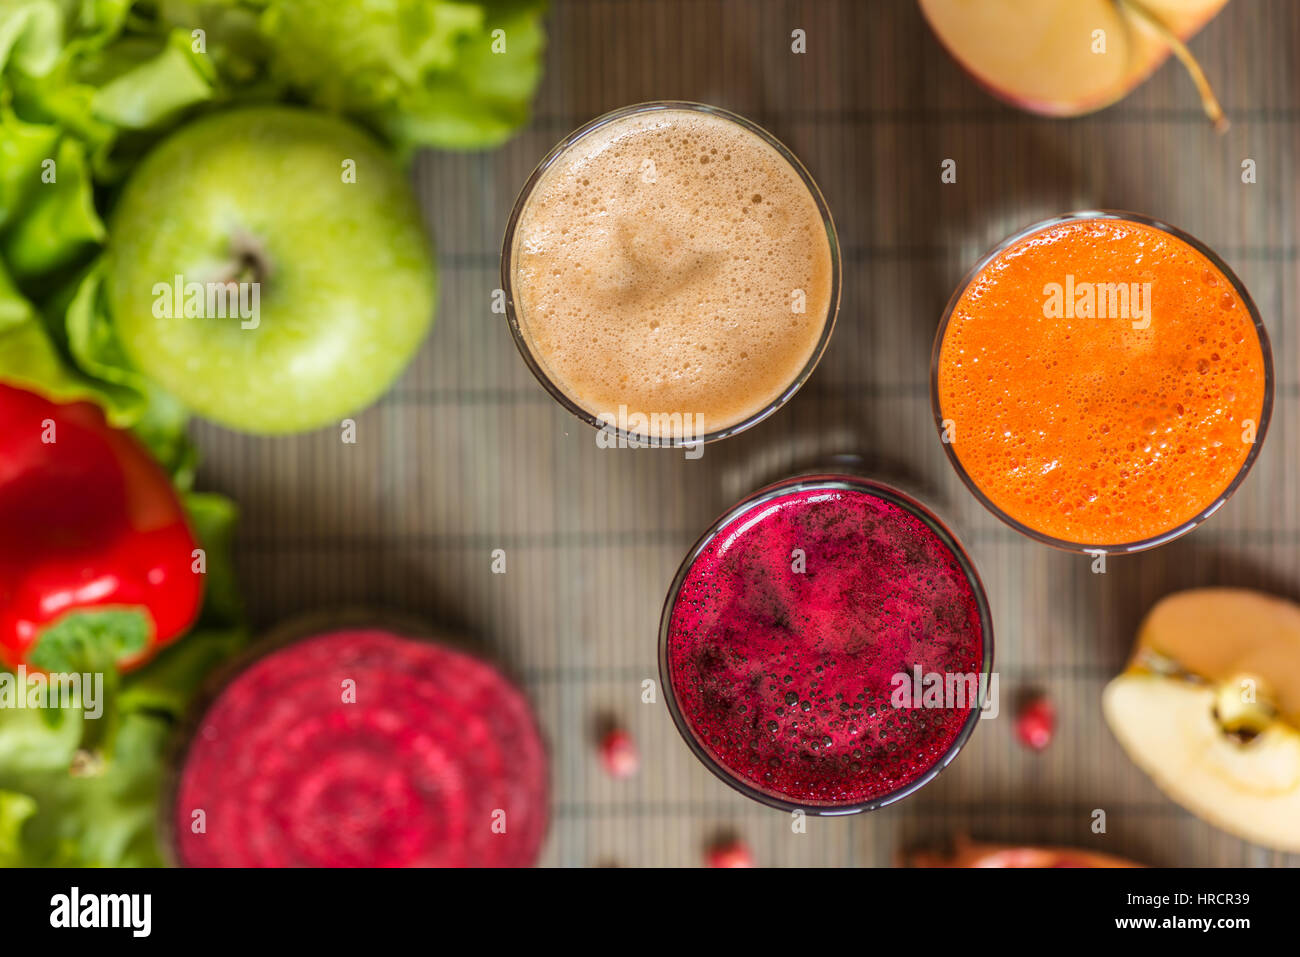 three glasses of different fresh juice. Beet, carrot and apple juices on grey wood background. Stock Photo